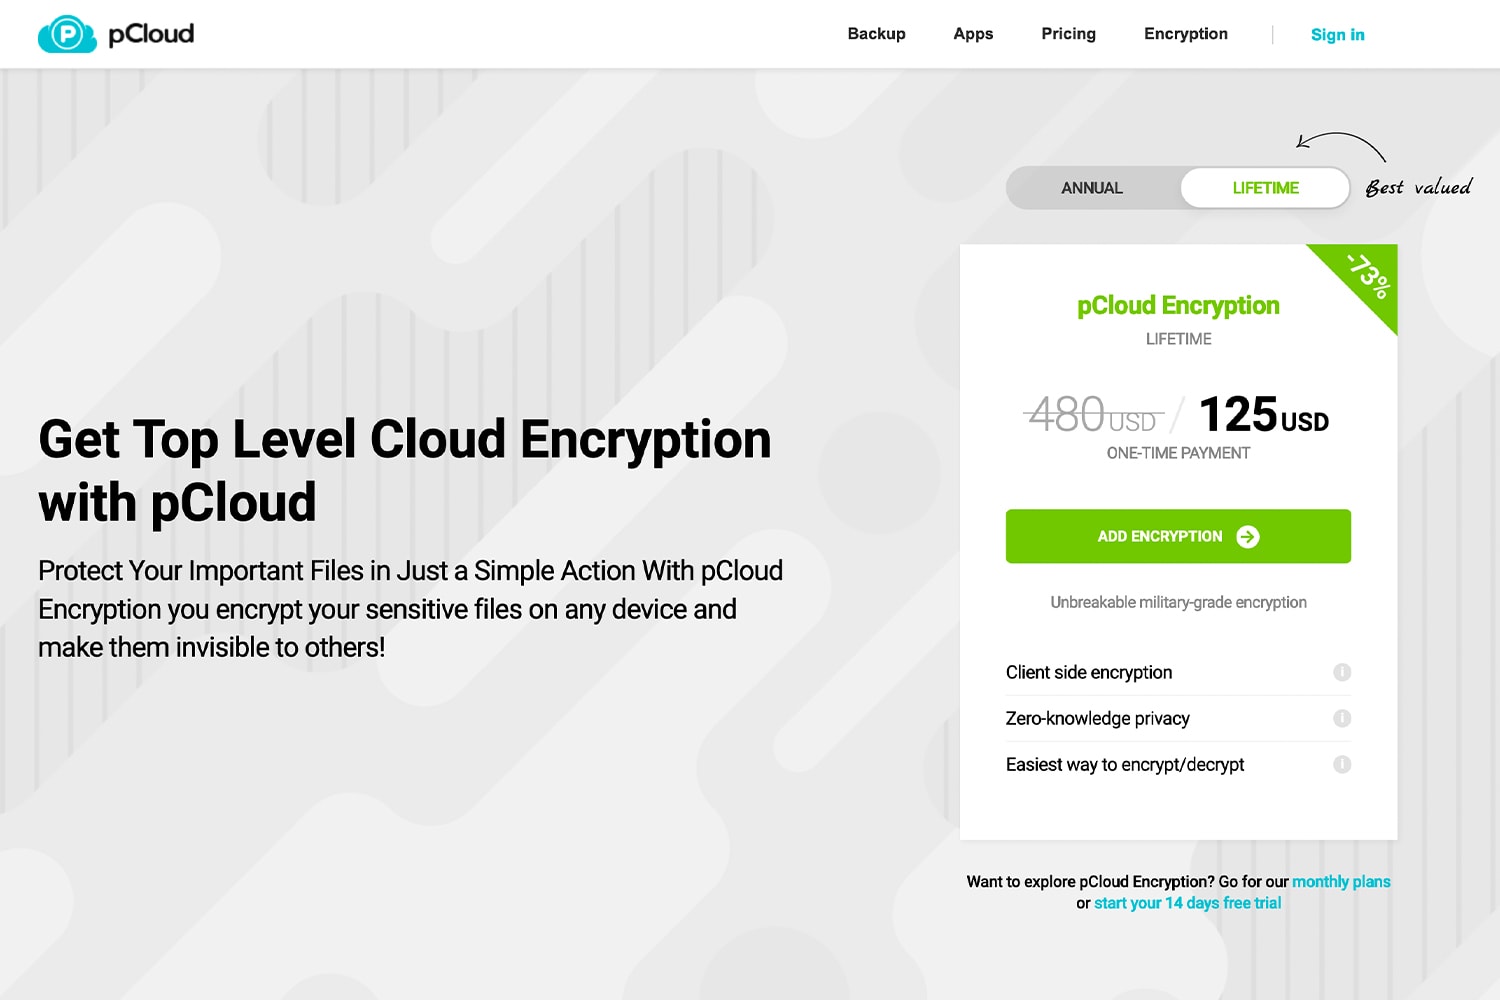 pCloud Crypto - End-to-end Encryption